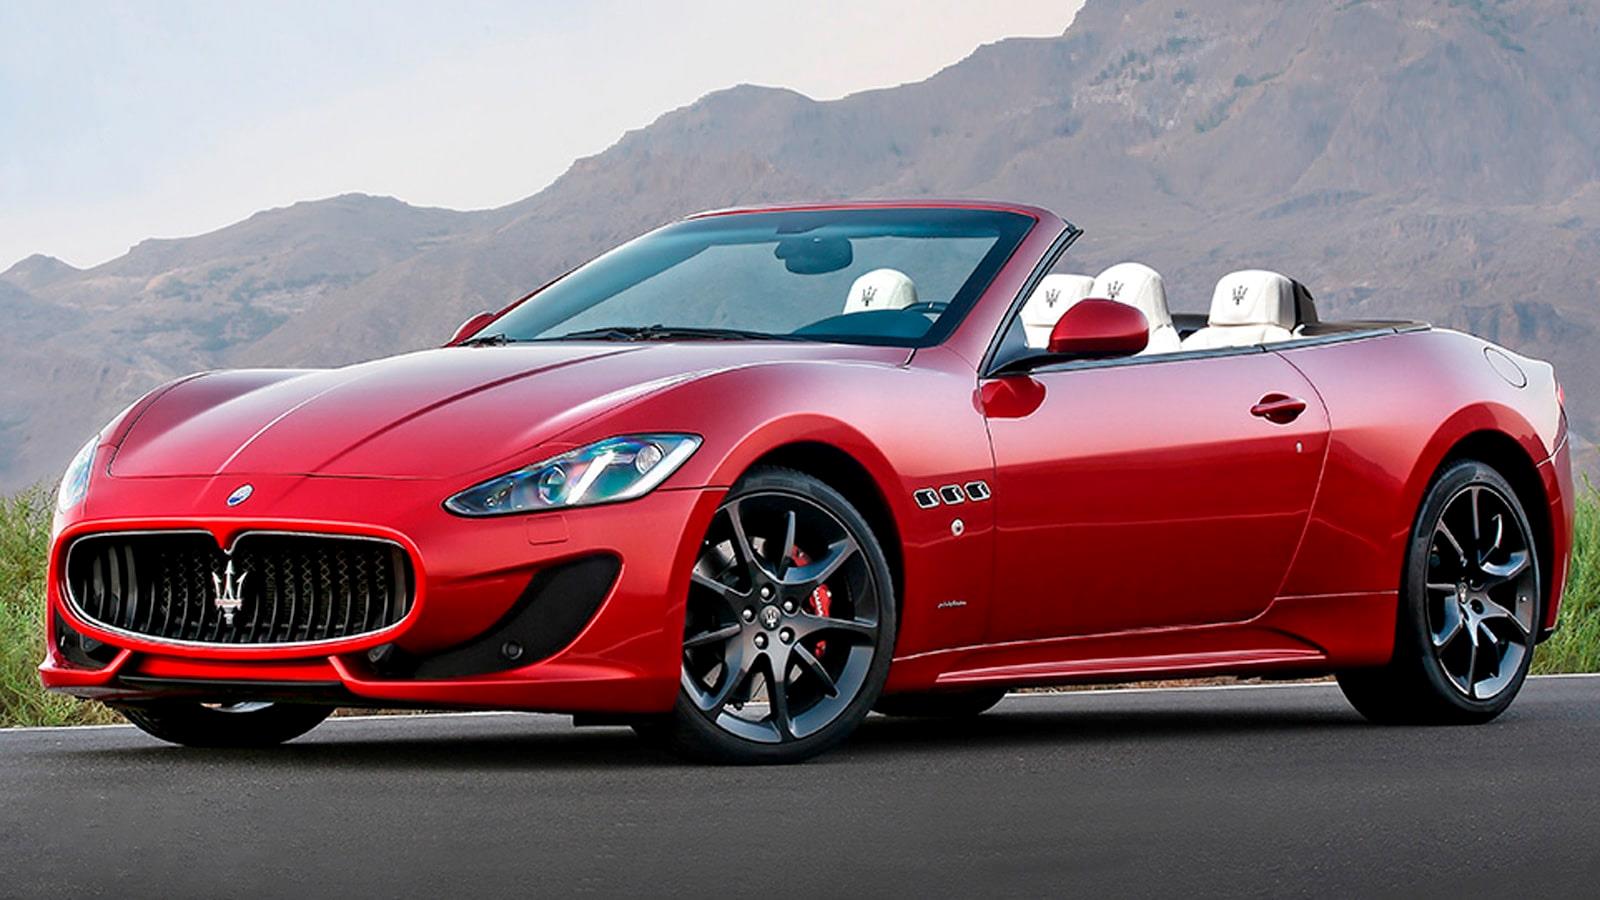 Red convertible Maserati on the road